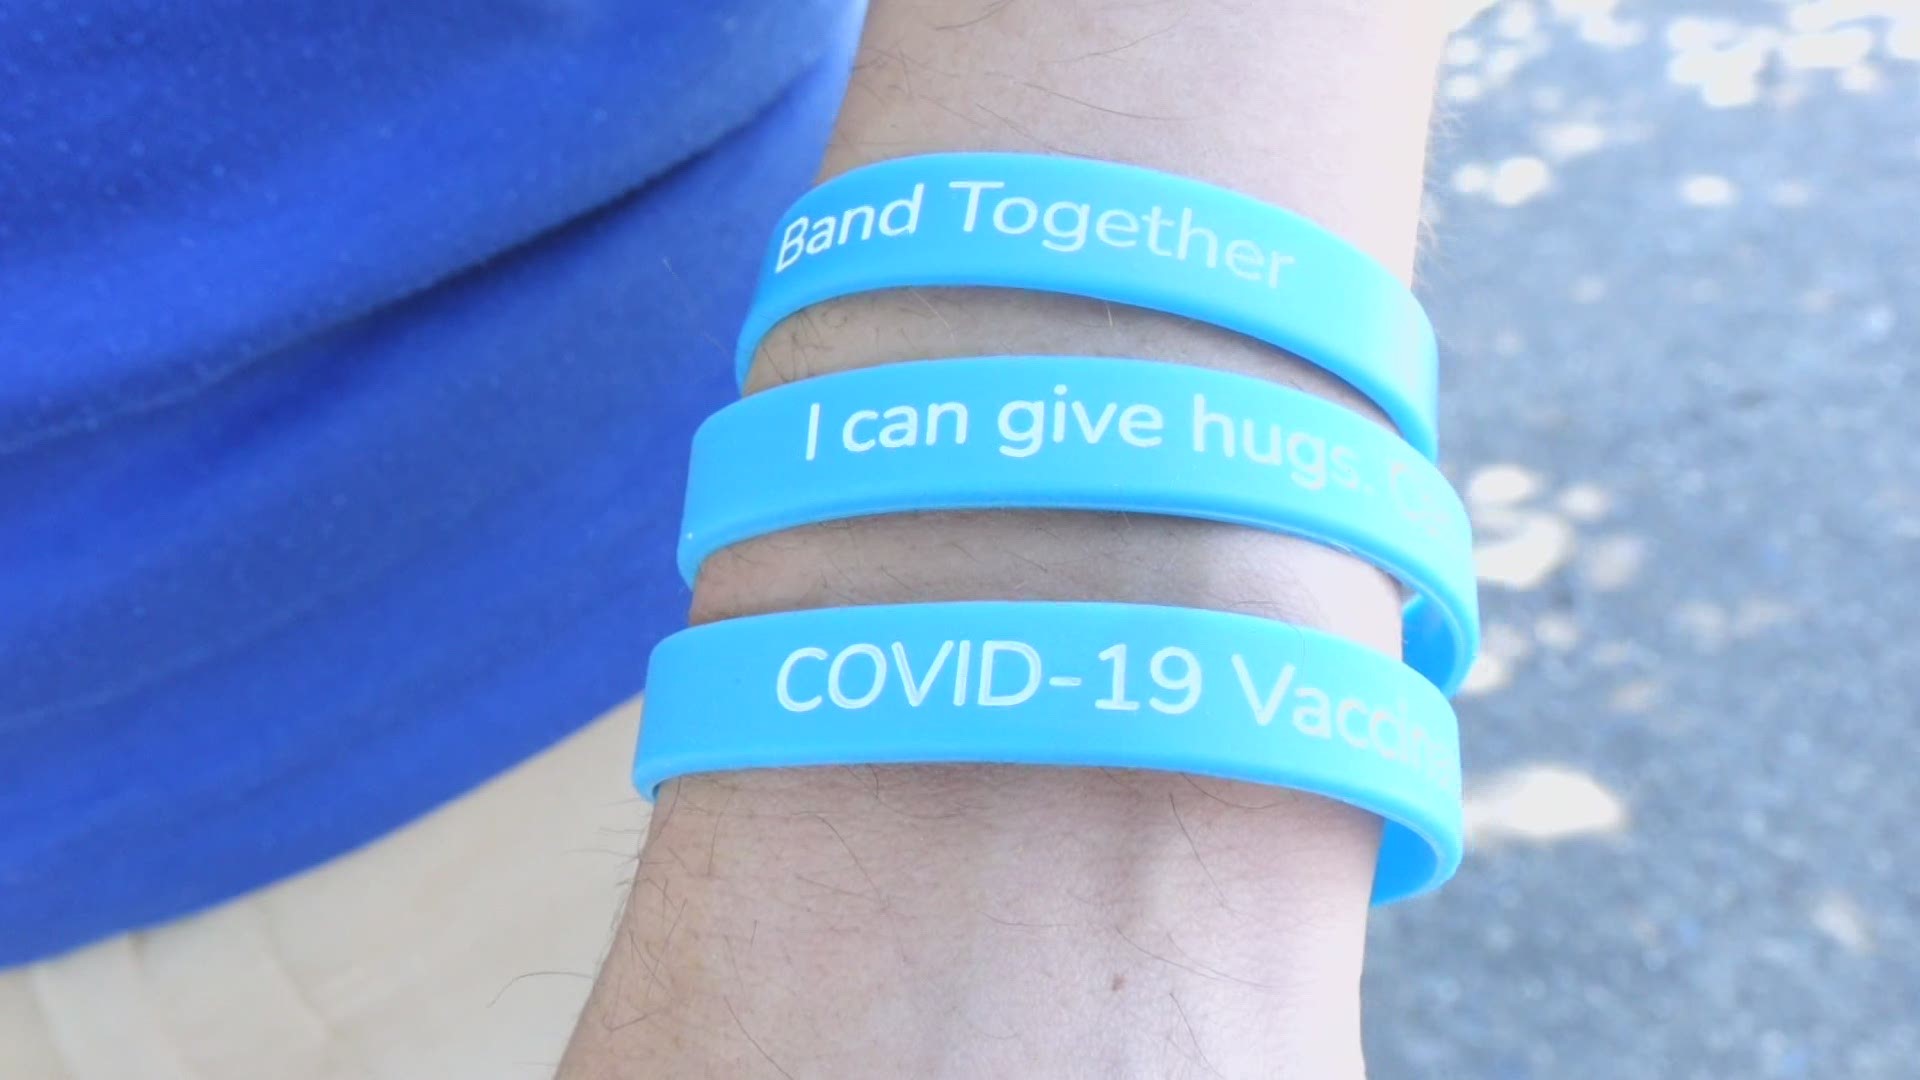 'VacSeen.org' creates simple silicone bracelets with slogans like "COVID-19 Vaccinated" on them so the wearer can easily display their vaccine status.